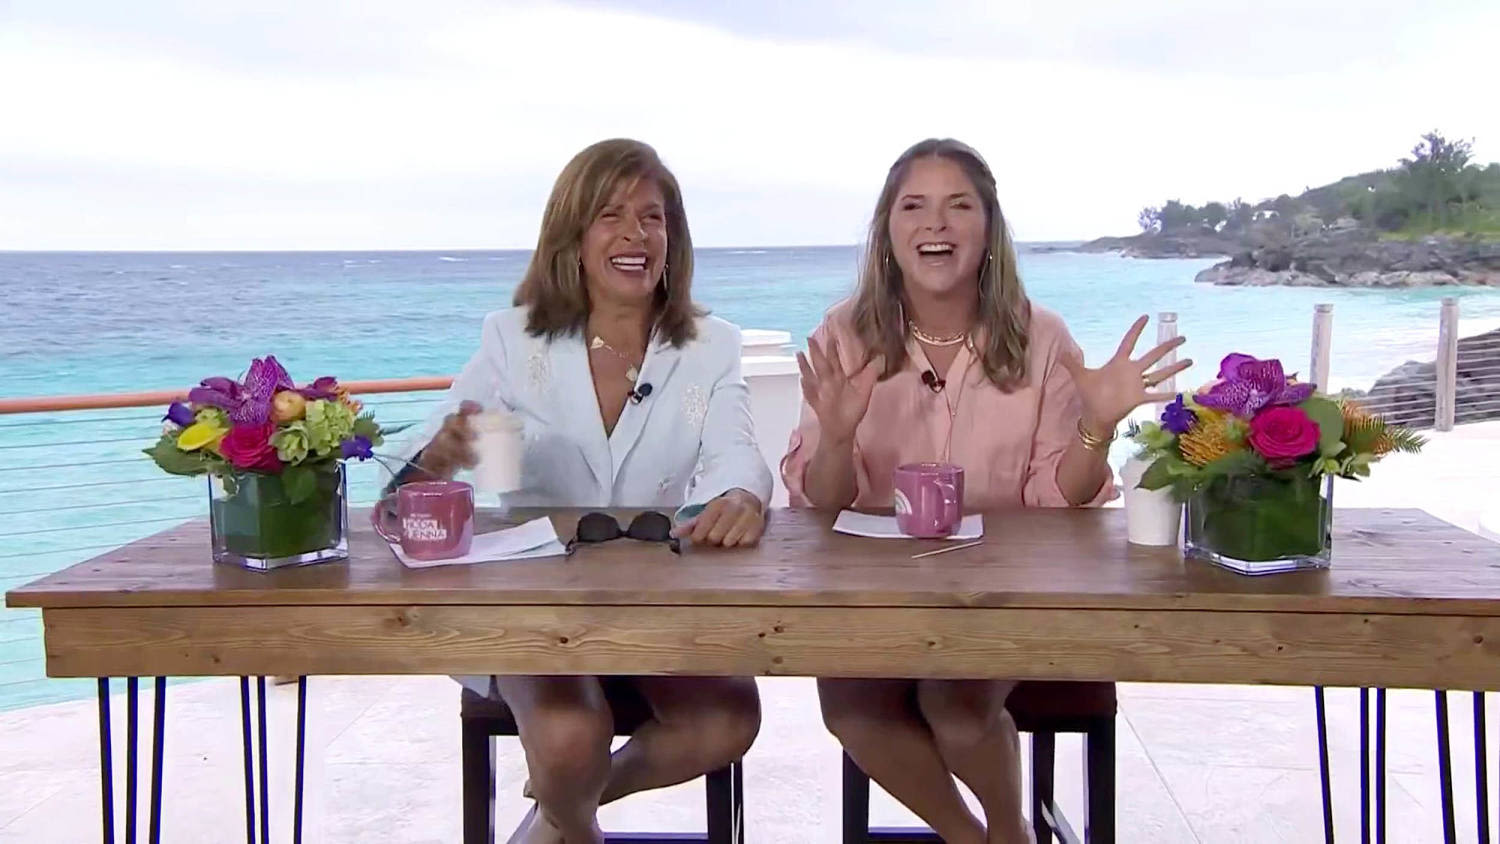 Hoda and Jenna debate breakfast in bed on Mother’s Day: ‘Y’all don’t want crumby sheets!’